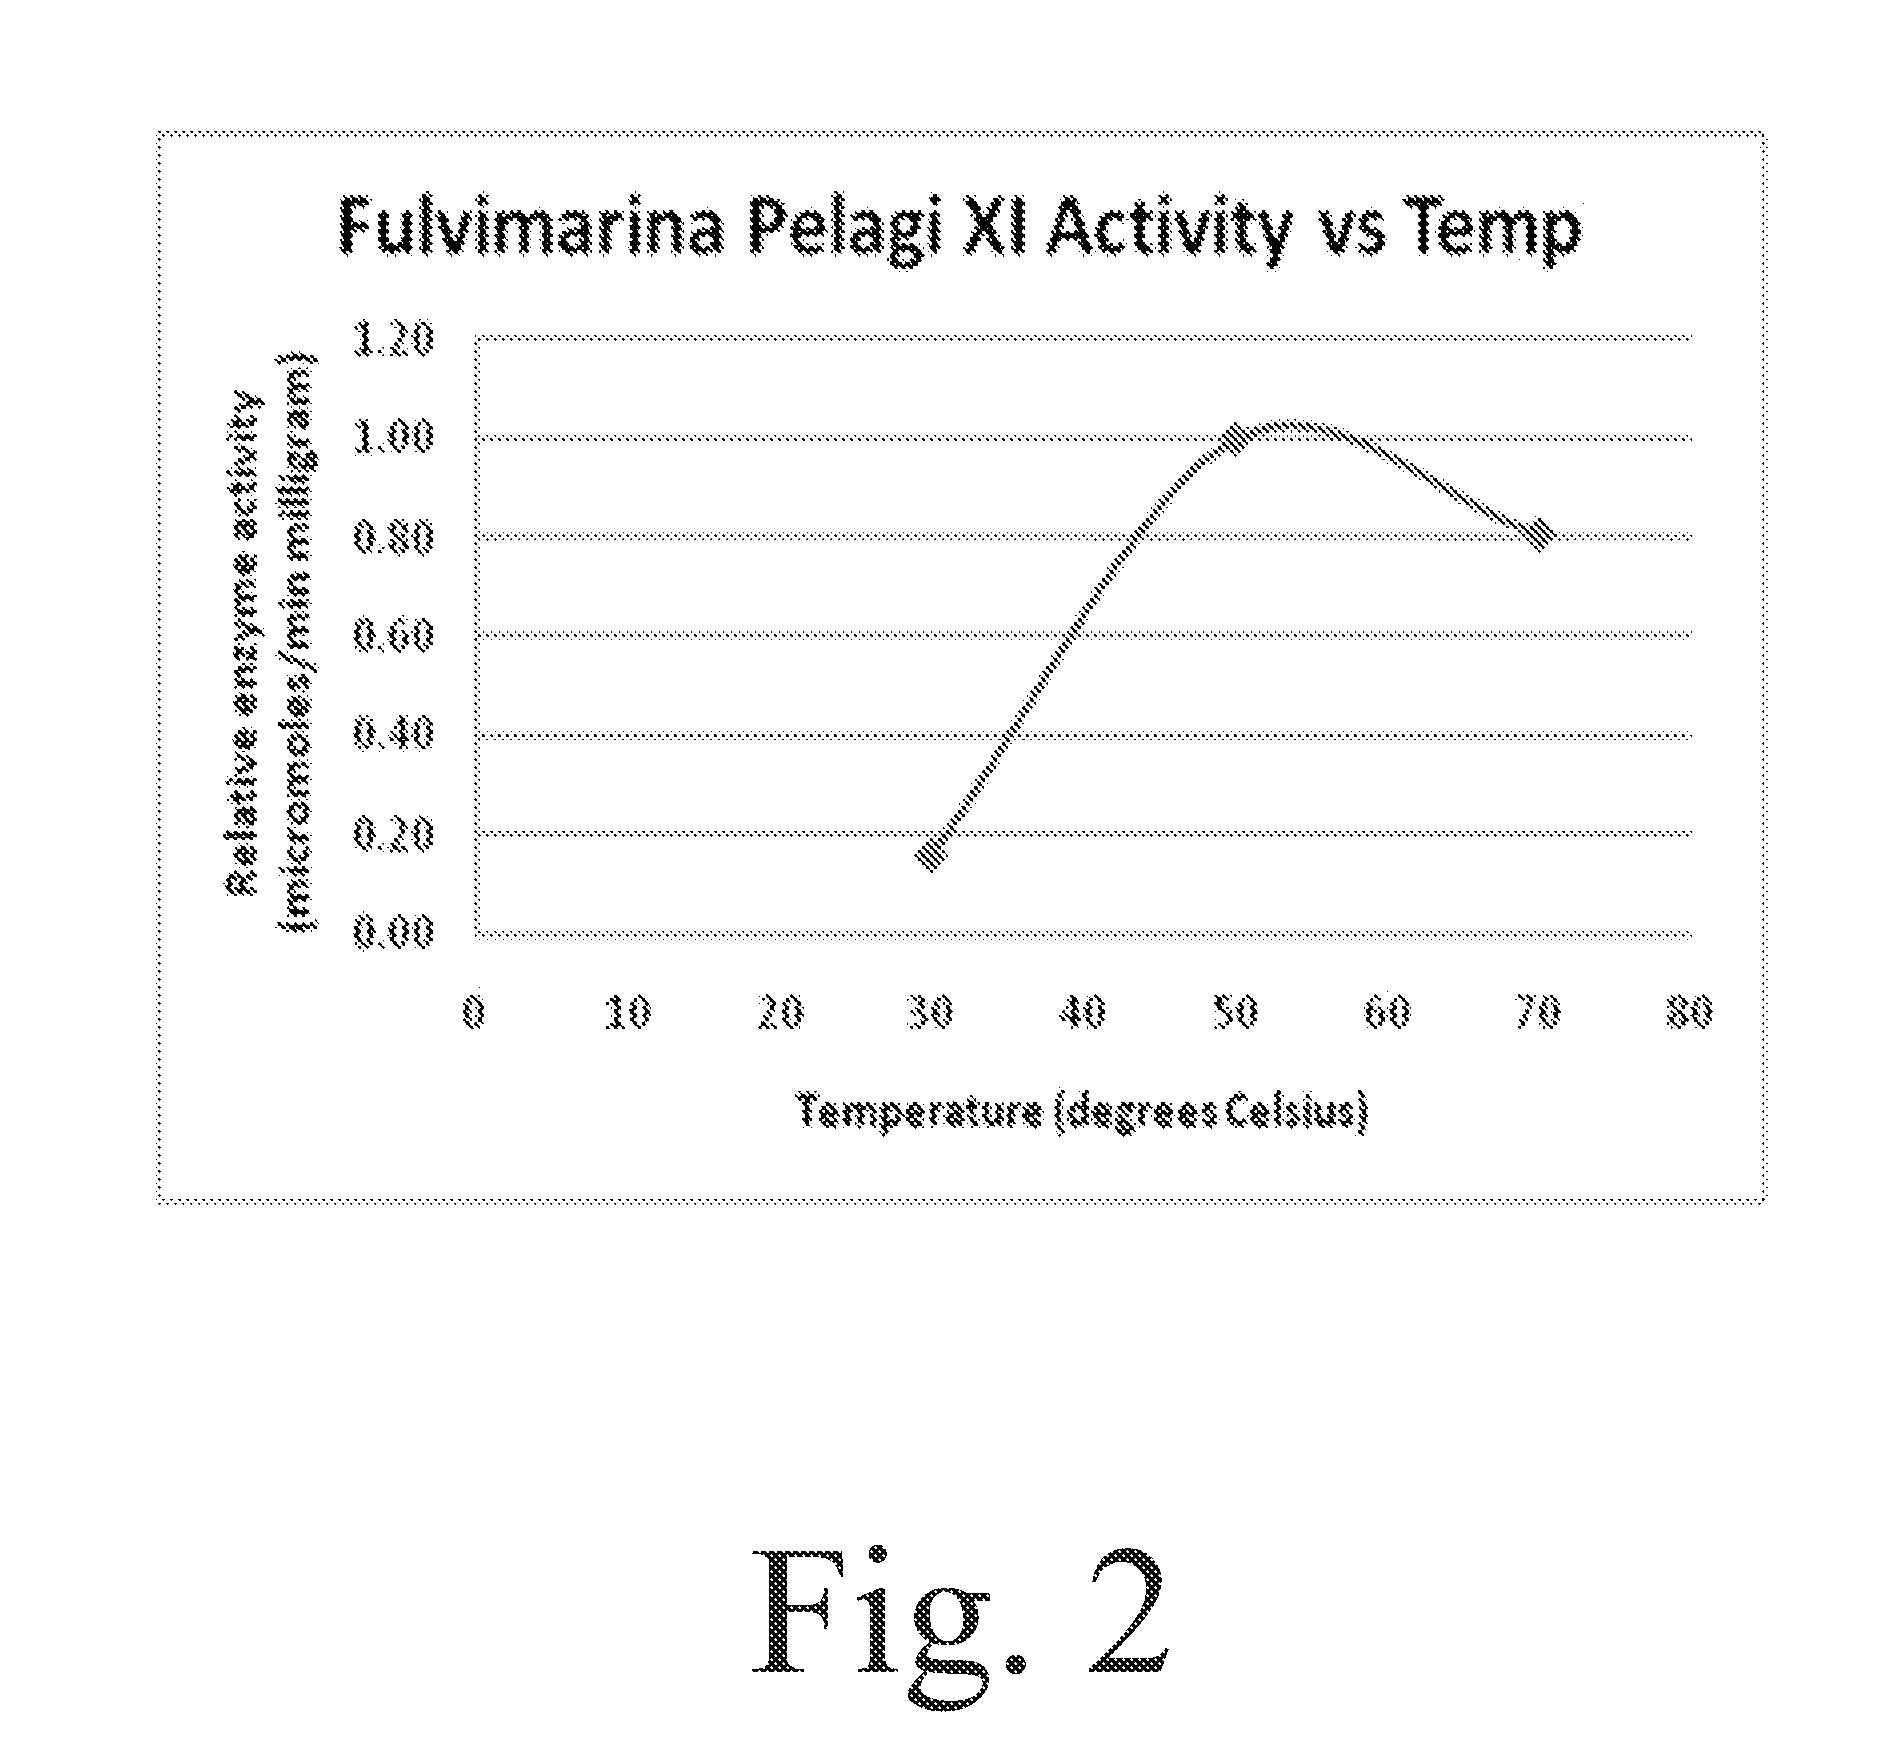 Method enabling isomerization process flows at lower pH, lower temperature, and in the presence of certain inhibiting compounds by using the xylose isomerase enzyme from the microorganism Fulvimarina pelagi